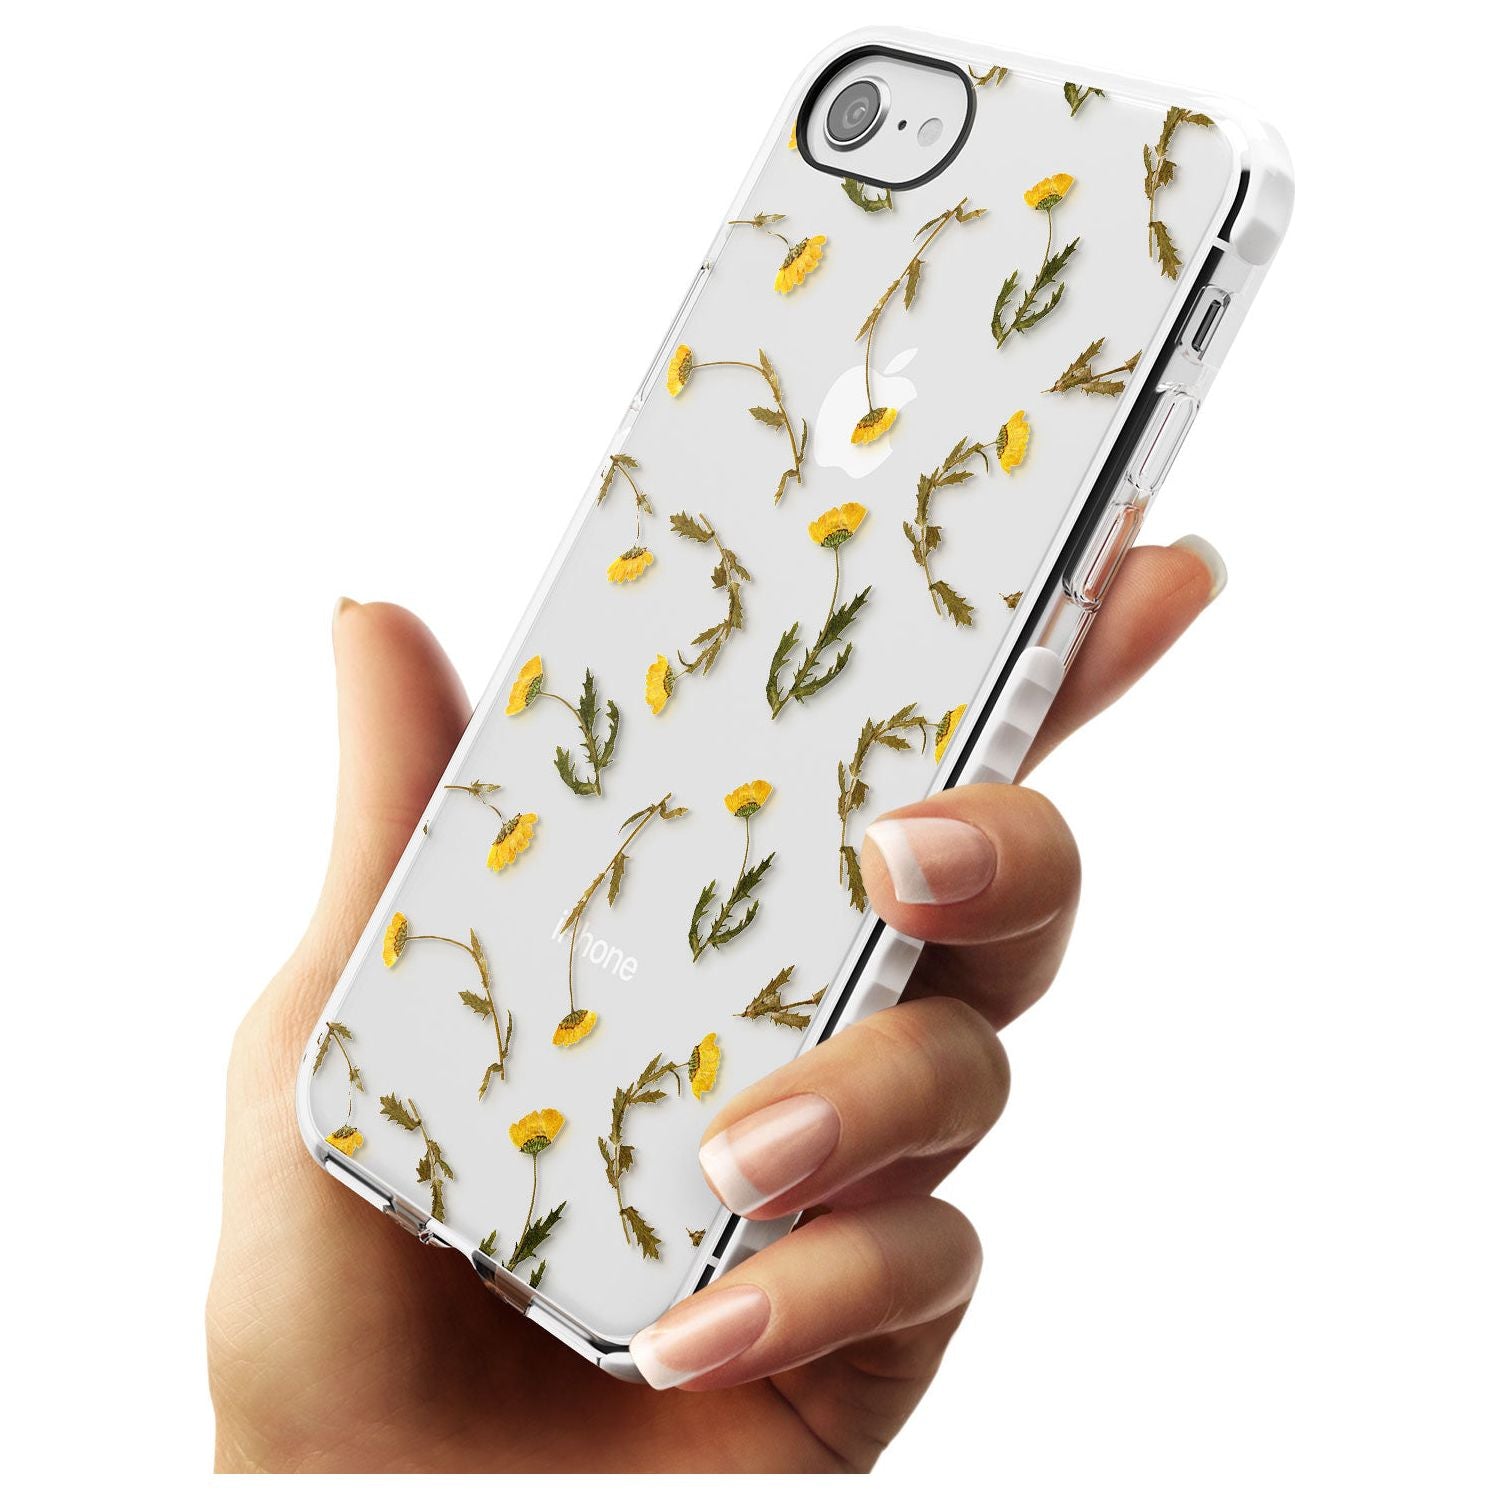 Long Stemmed Wildflowers - Dried Flower-Inspired Impact Phone Case for iPhone SE 8 7 Plus